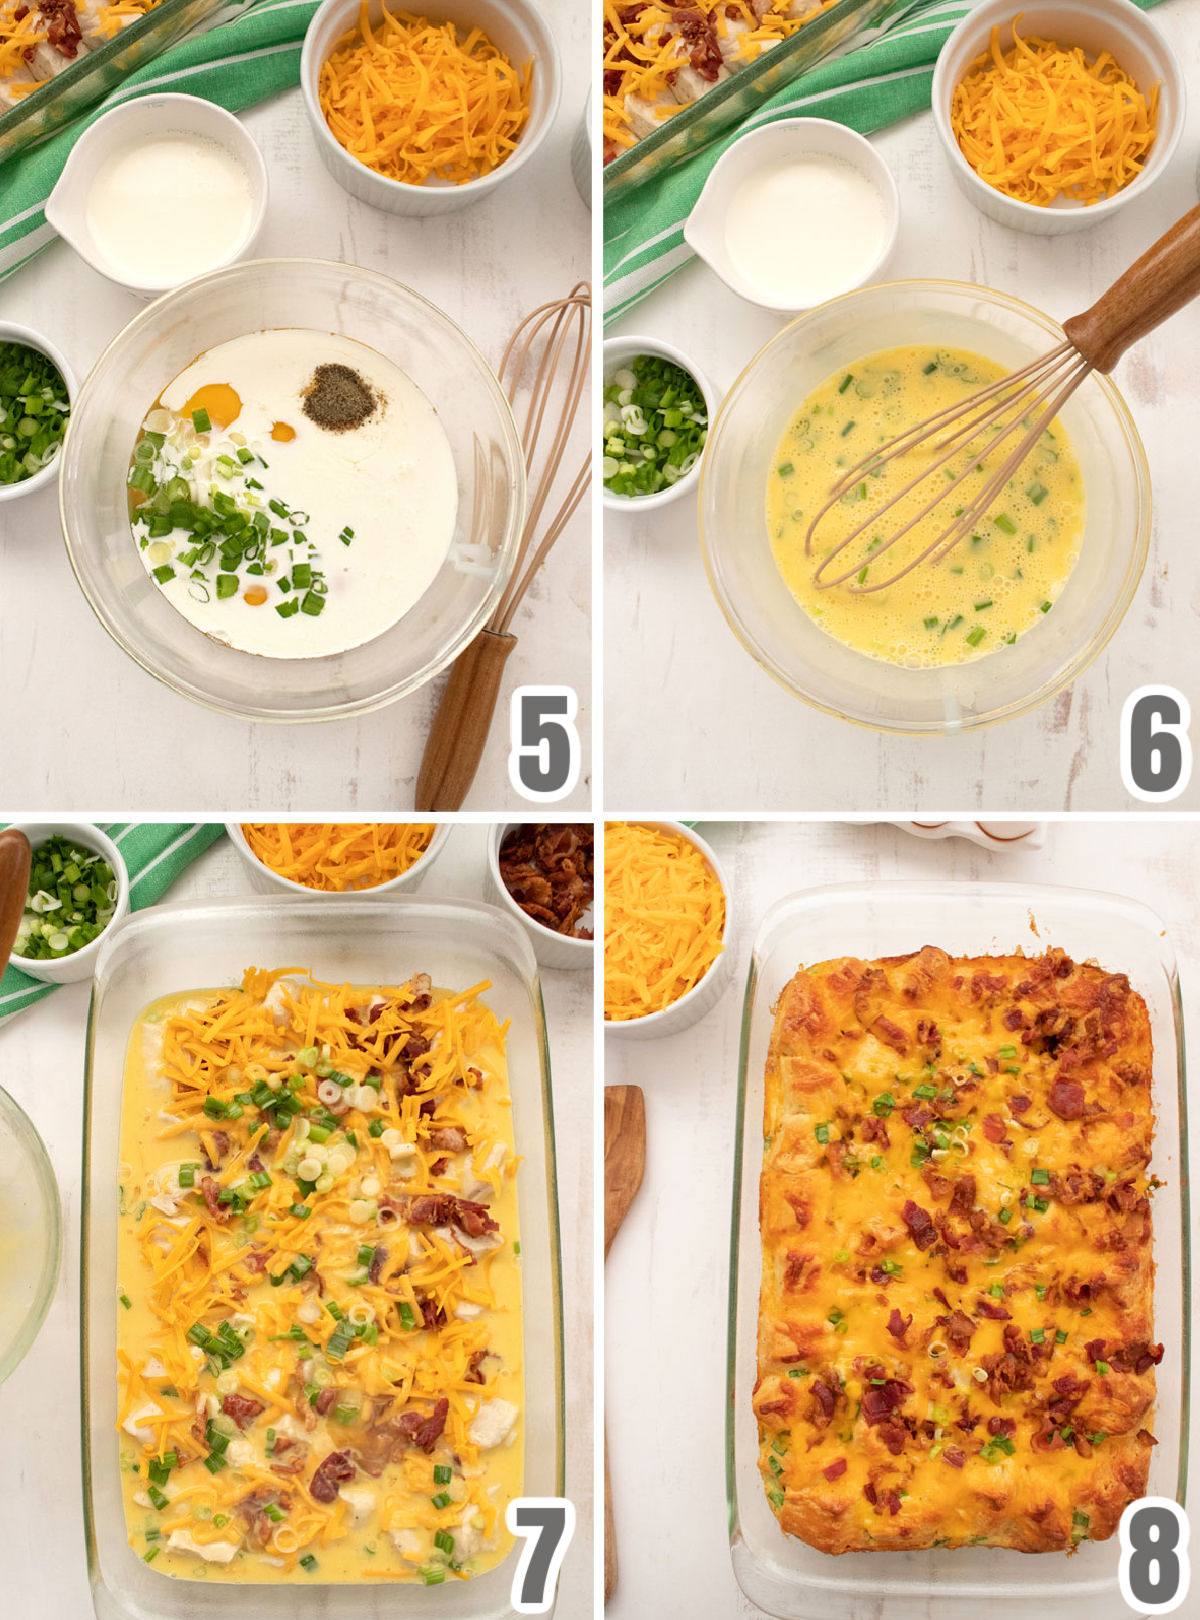 Collage image showing the steps for preparing the casserole for baking.